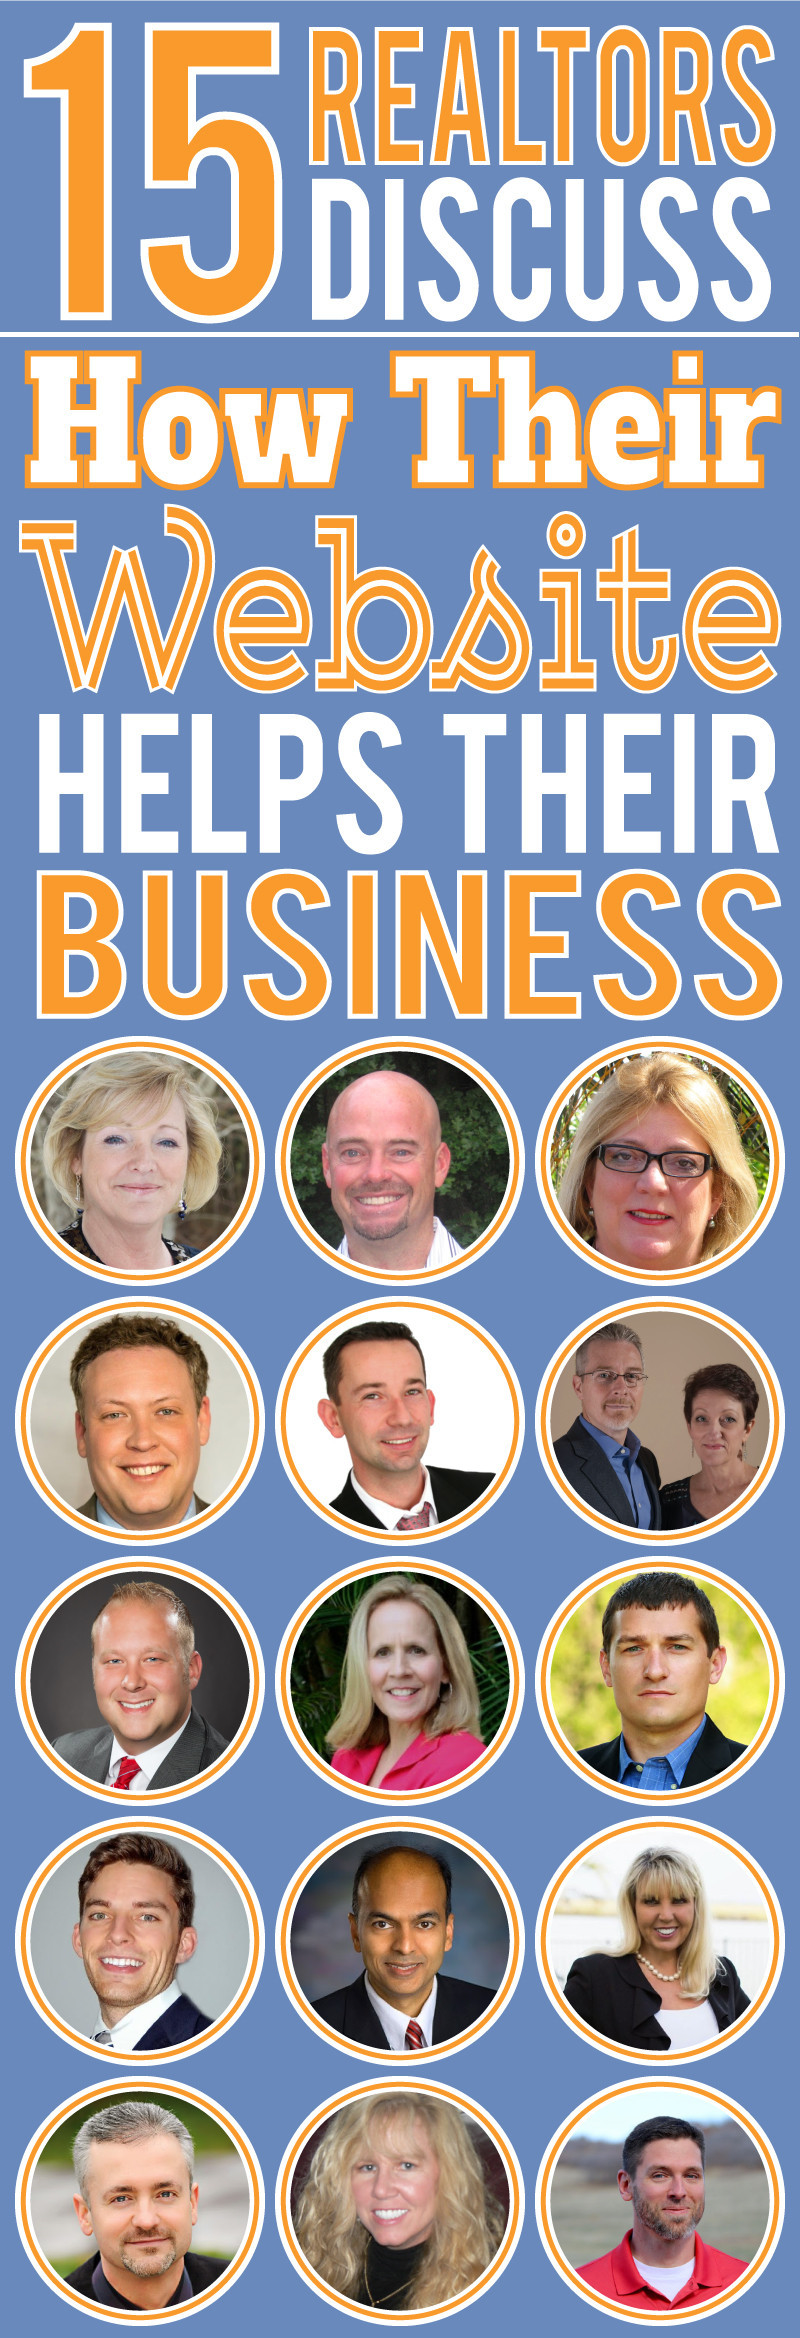 15 Realtors Discuss How Their Website Helps Their Business